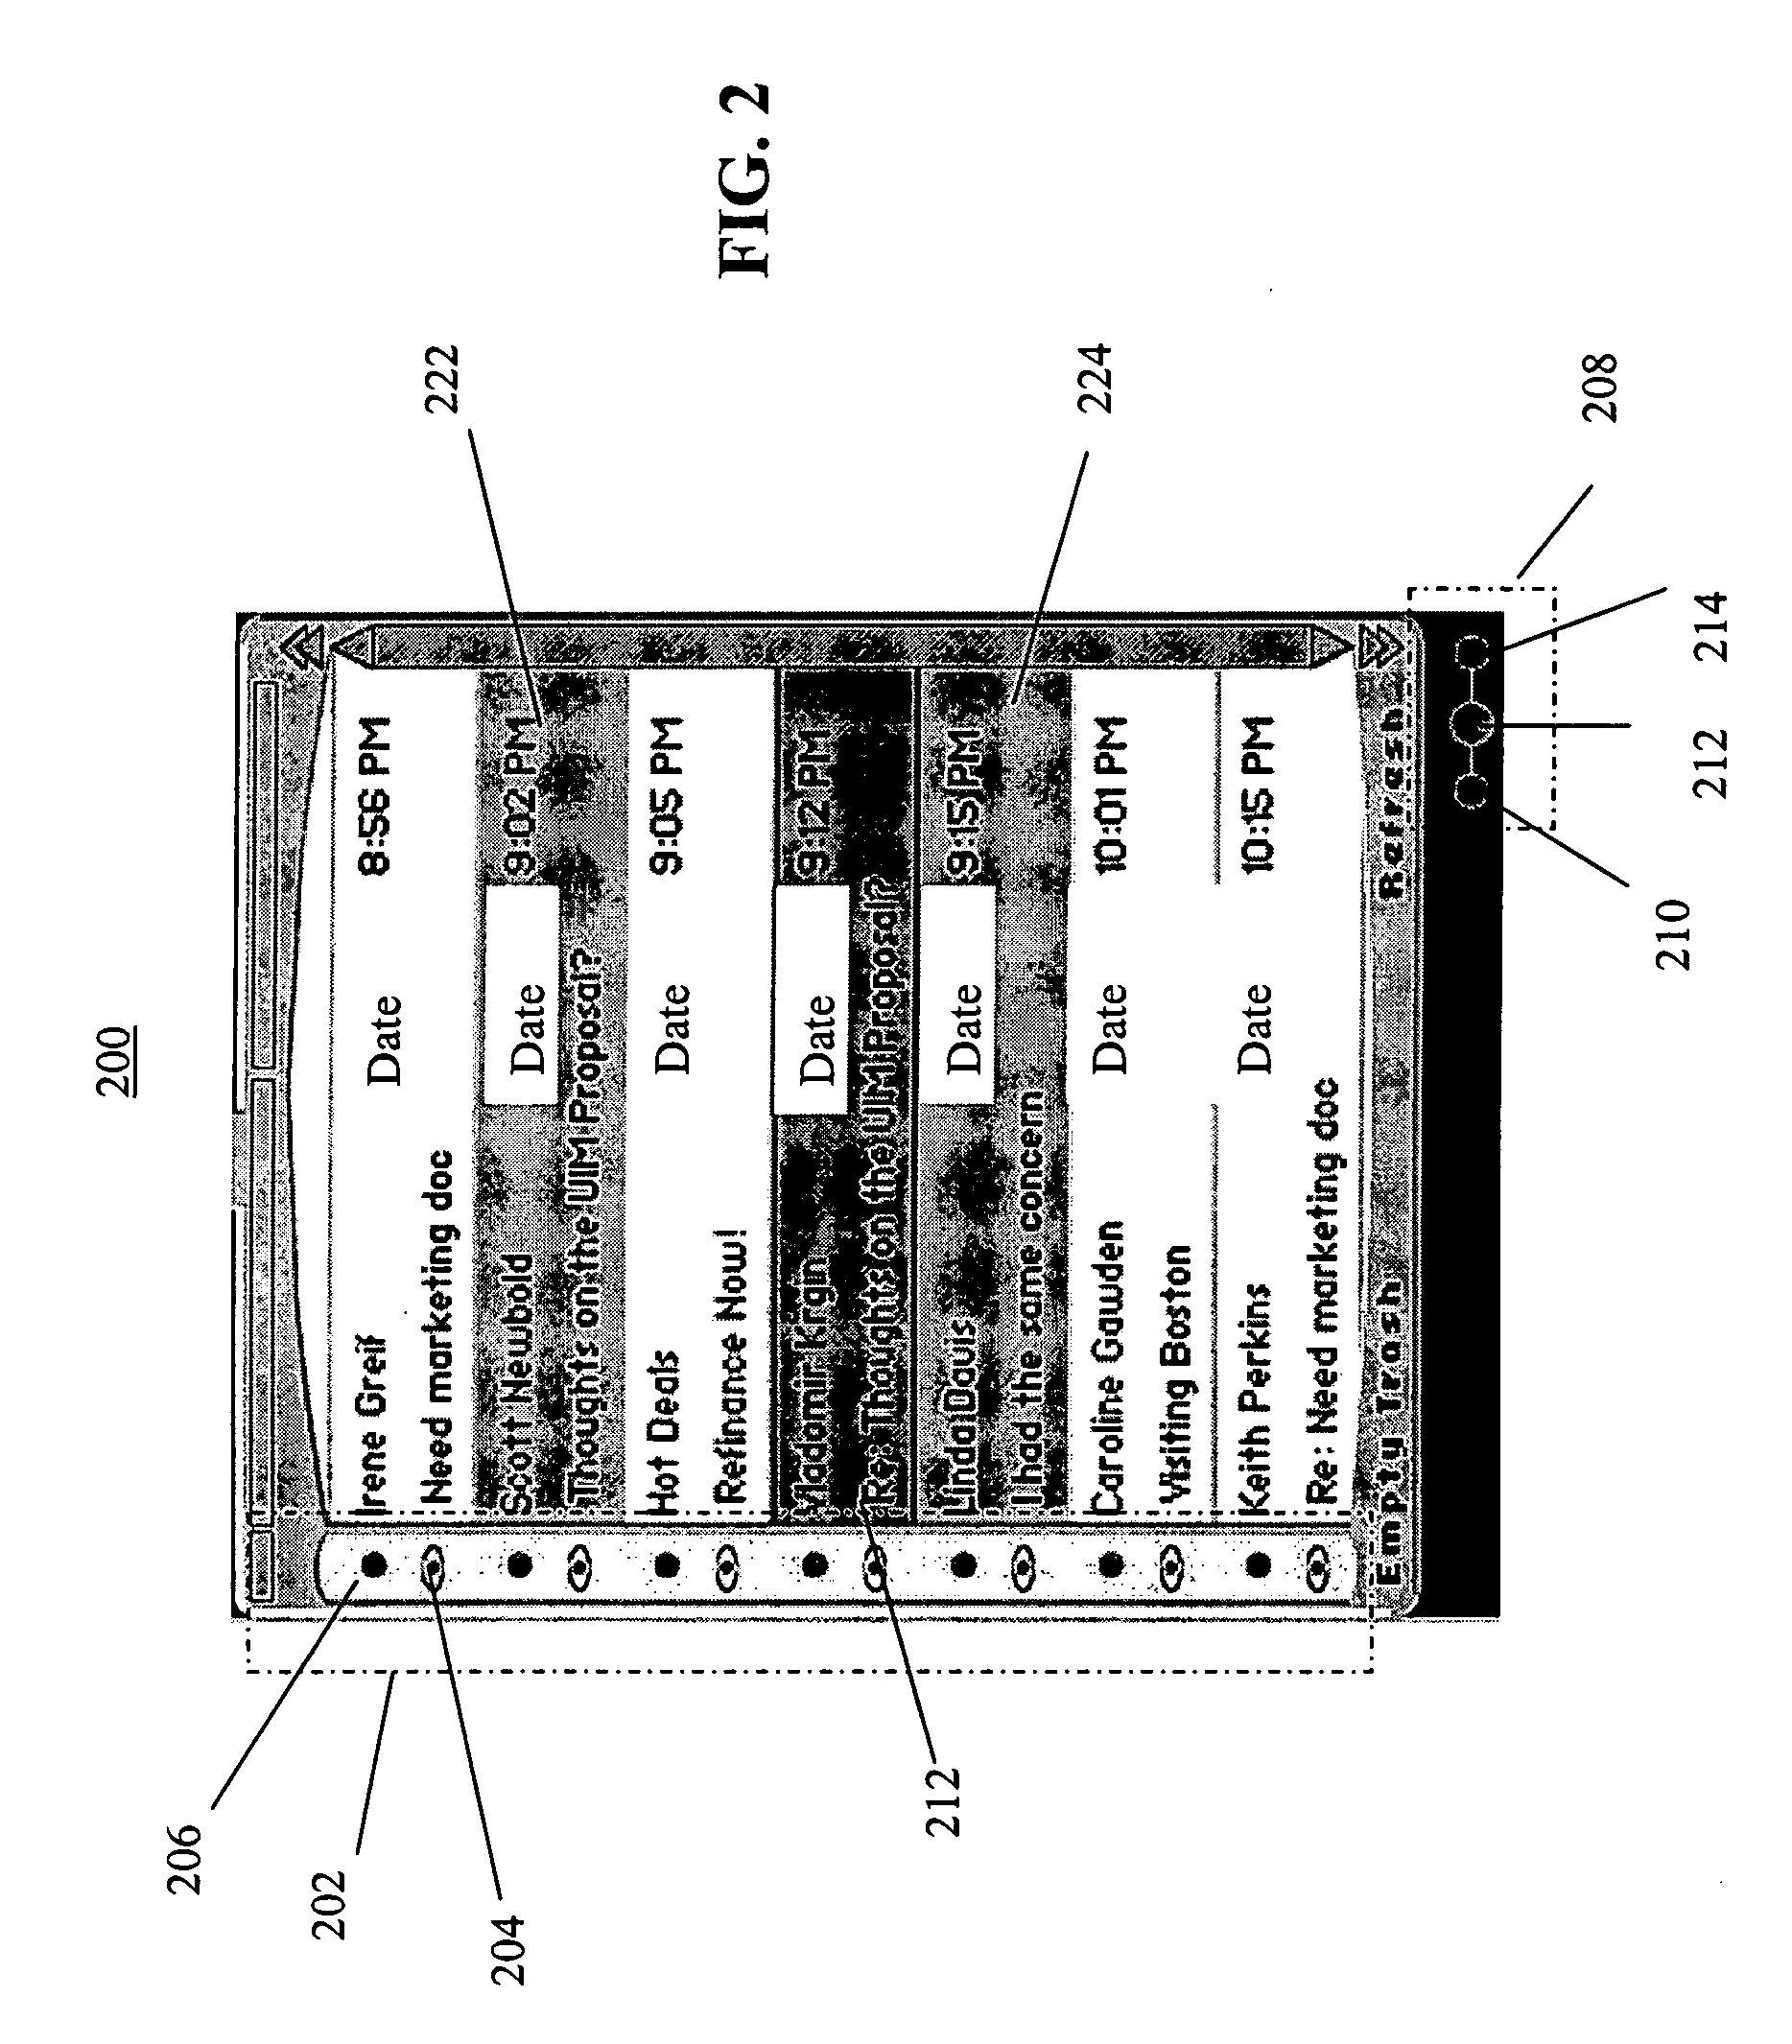 Method and apparatus for indicating and navigating related items